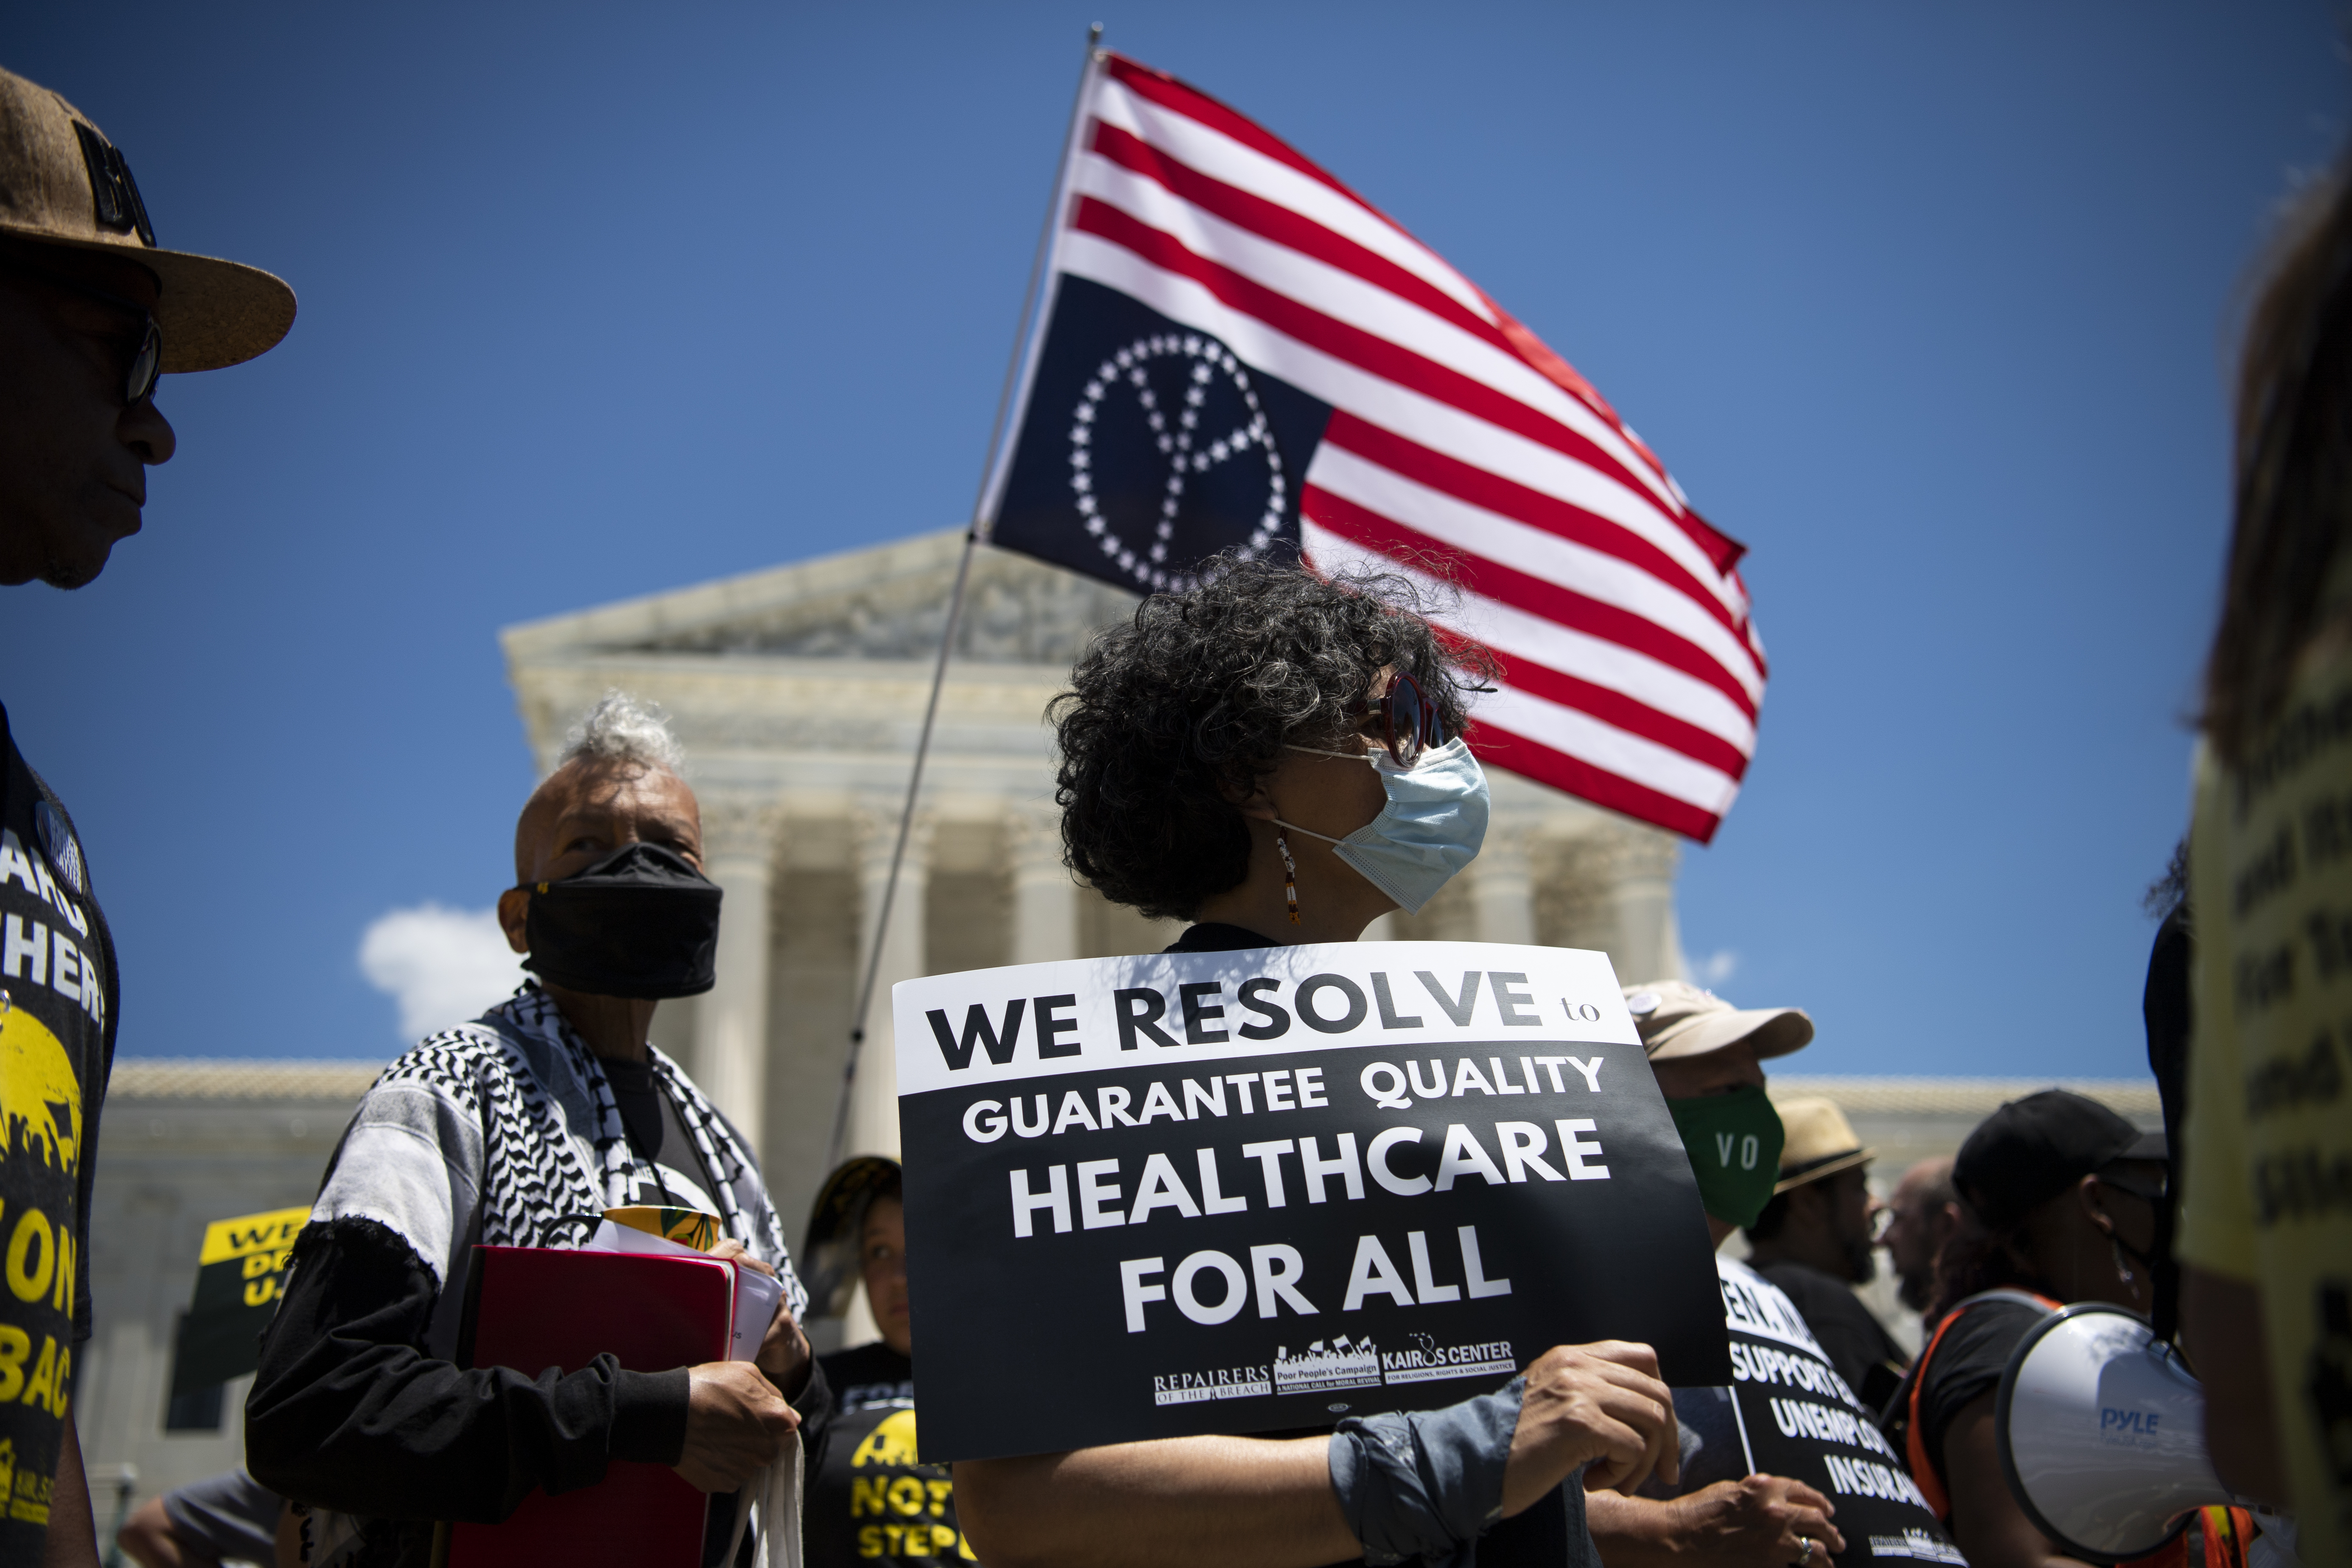 Protesters outside the Supreme Court building carry an American flag with a peace symbol on it and a sign that reads, “We resolve to guarantee quality healthcare for all.”